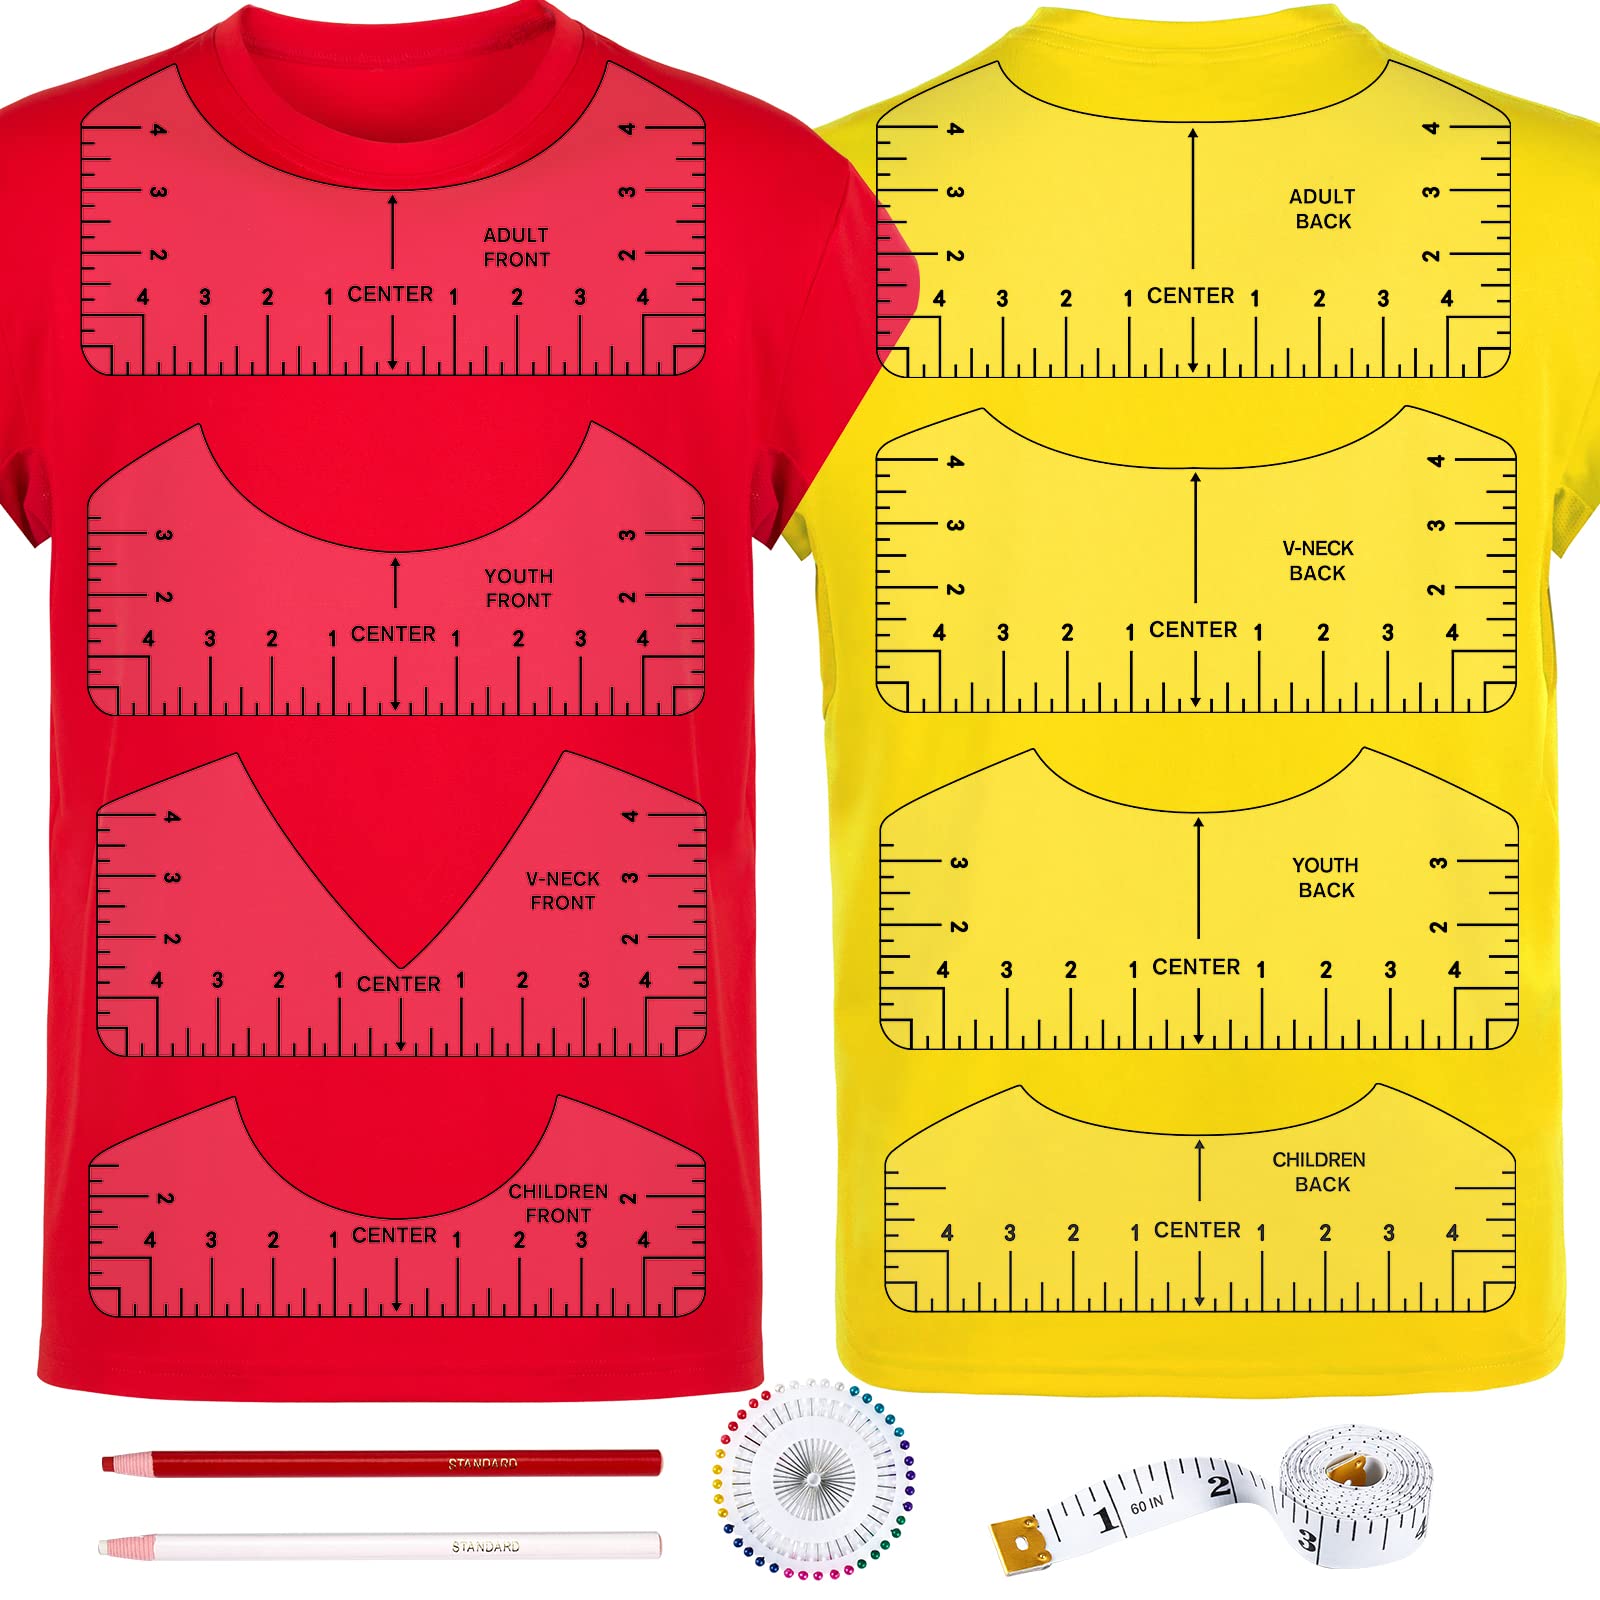 12pcs Tshirt Ruler Guide for Vinyl Alignment, T Shirt Rulers to Center Designs, PVC Measurement Template, Craft Sewing Supplies Accessories Tools for Cricut Heat Press & Cameo & HTV Transfer Vinyl